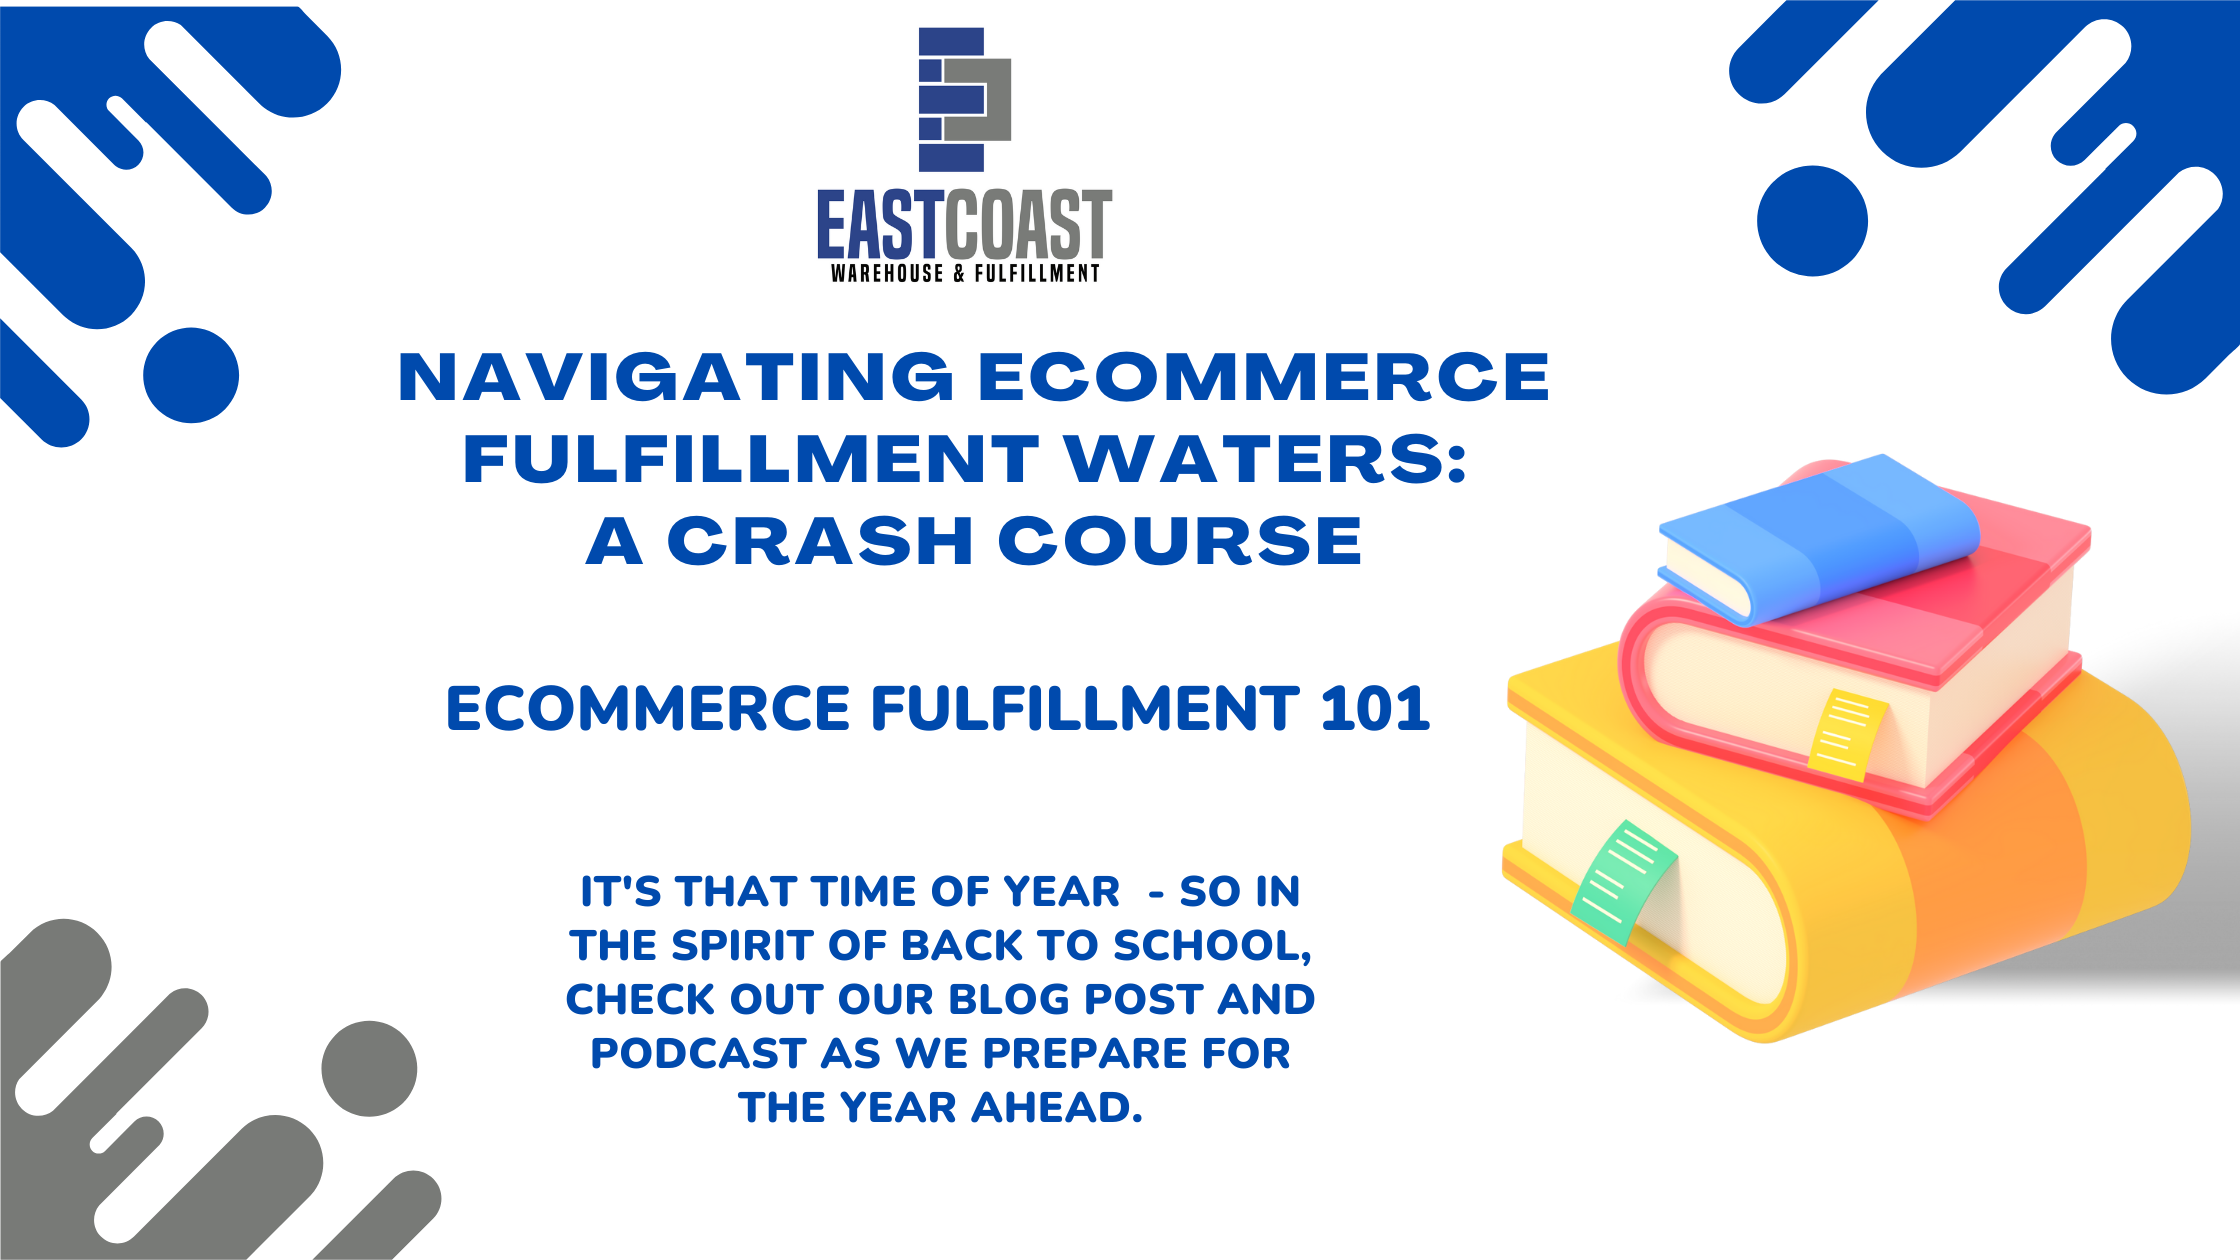 It's that time of year - So in the spirit of back to school East Coast Warehouse and Fulfillment offers Ecommerce Fulfillment 101.